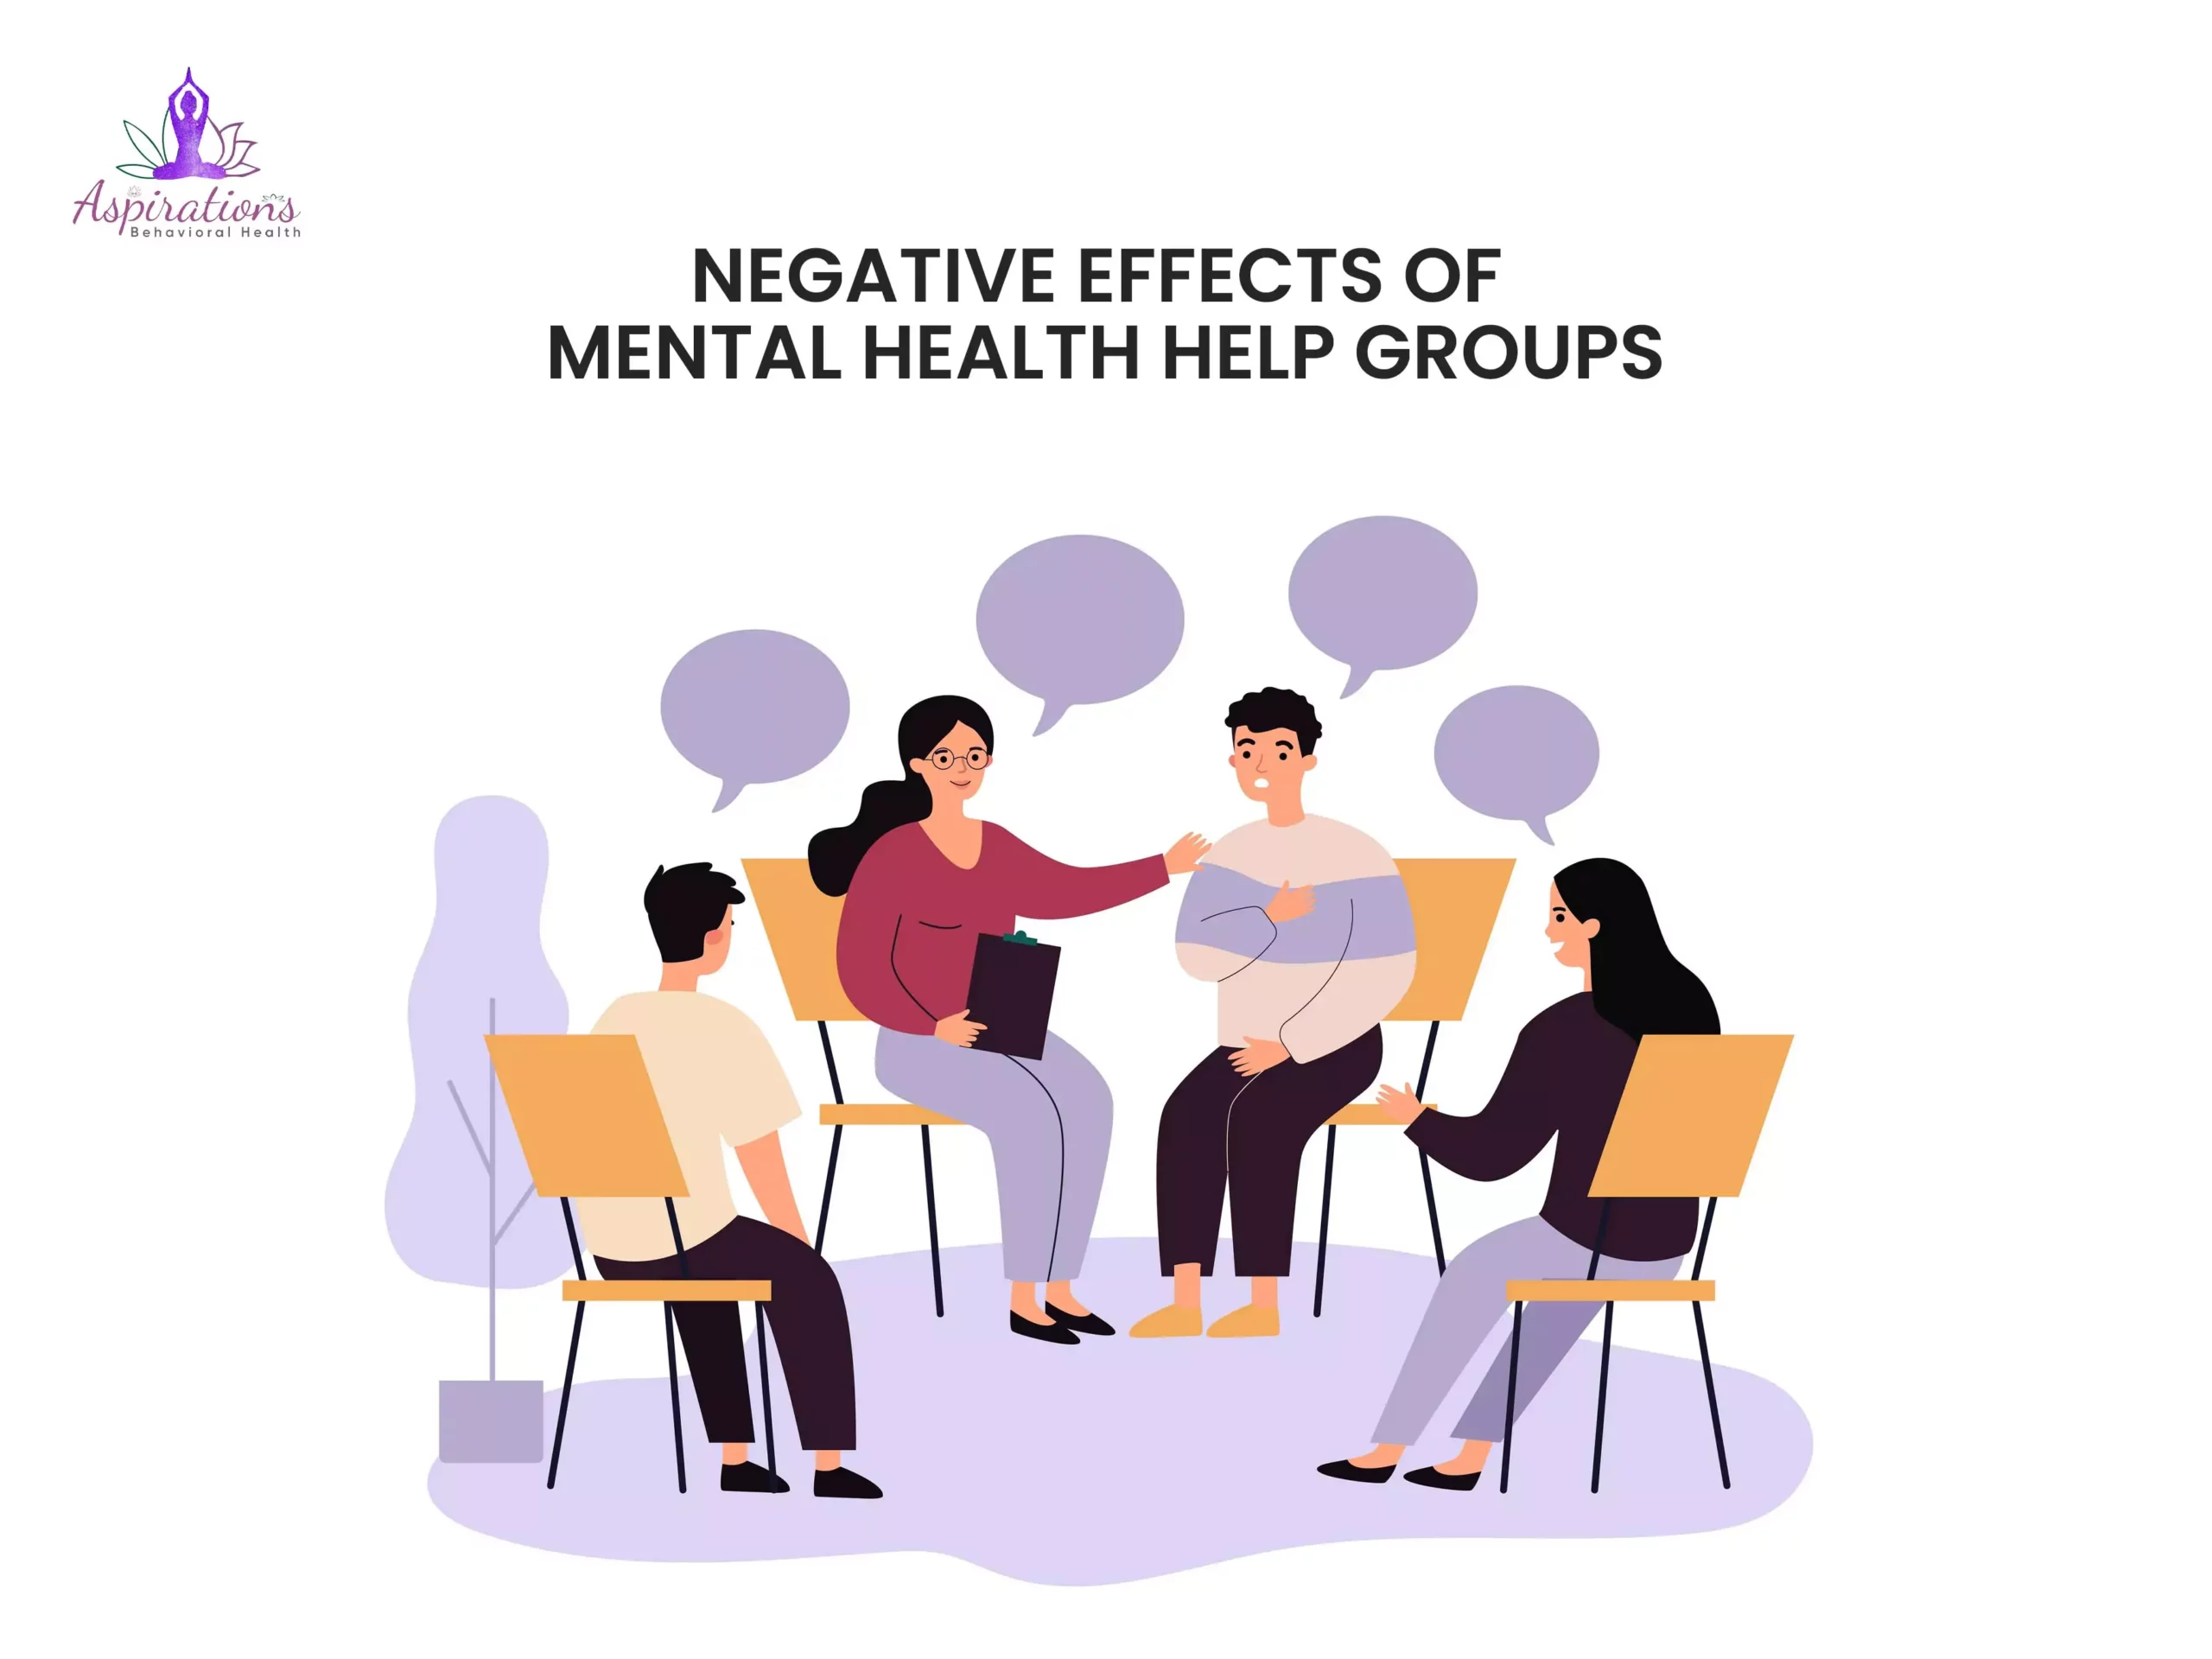 Negative Effects of Mental Health Help Groups